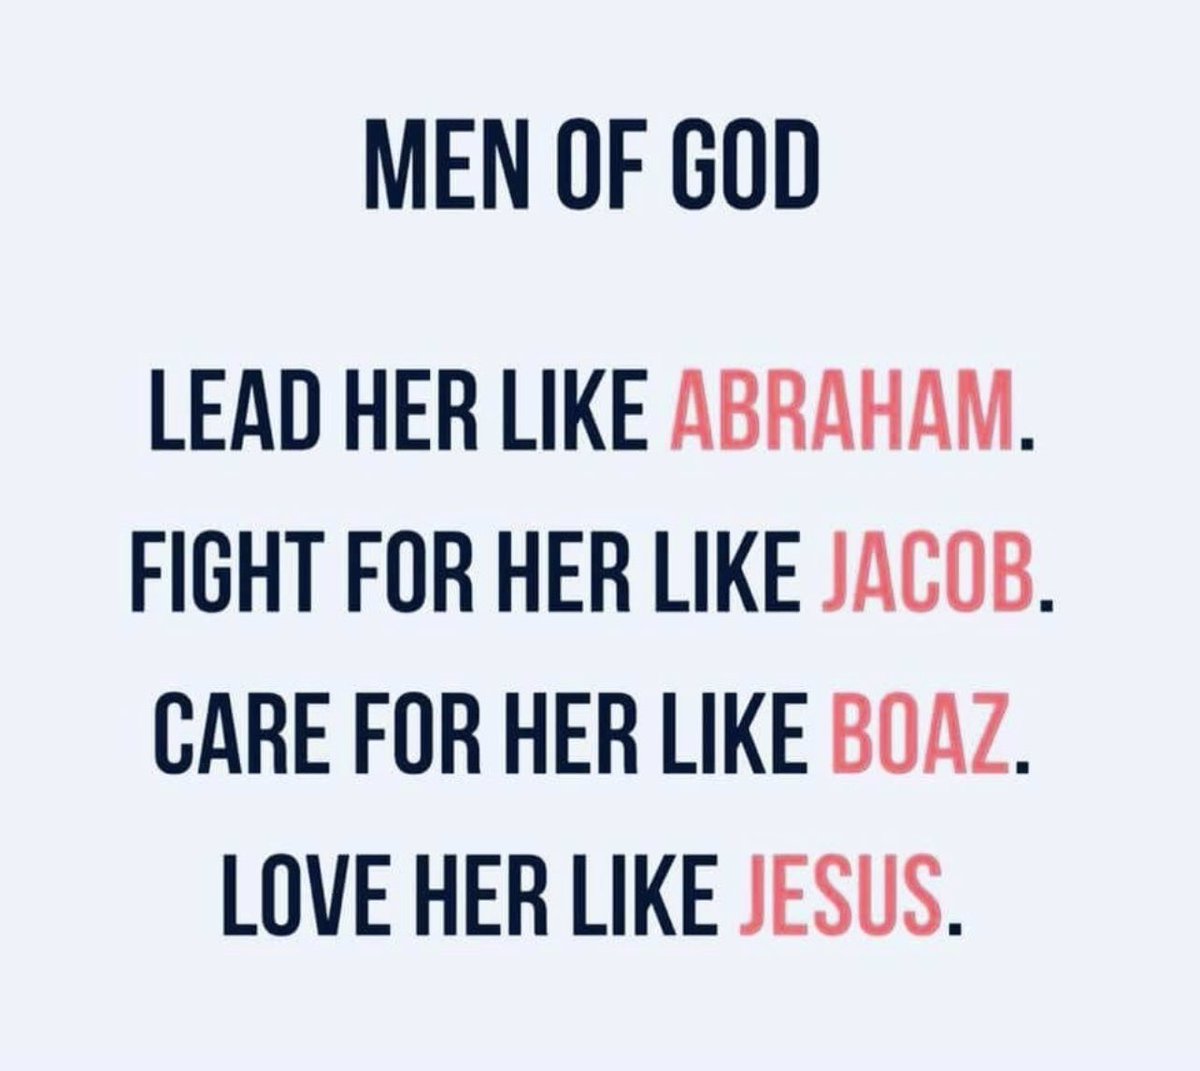 Love like Jesus:
#ChristianLiving 
#JesusIsLord 
Ephesians 5:25
King James Version
Husbands, love your wives, even as Christ also loved the church, and gave himself for it;